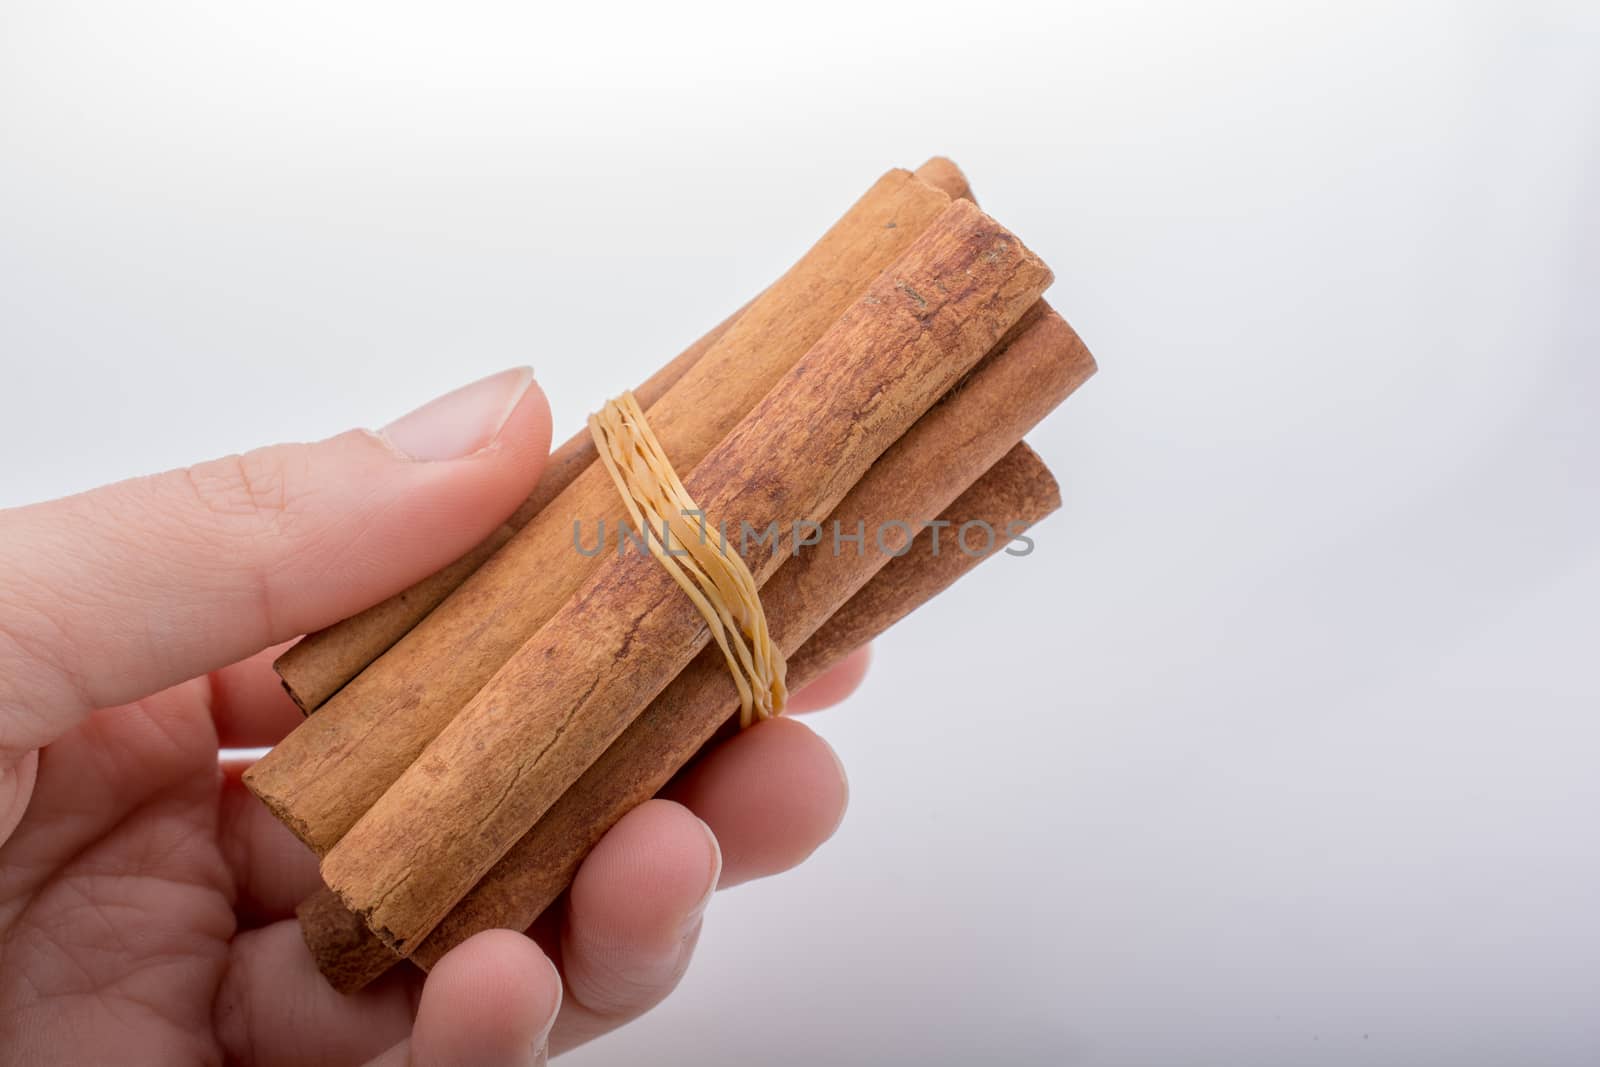 Cinnamon sticks  placed on white background by berkay